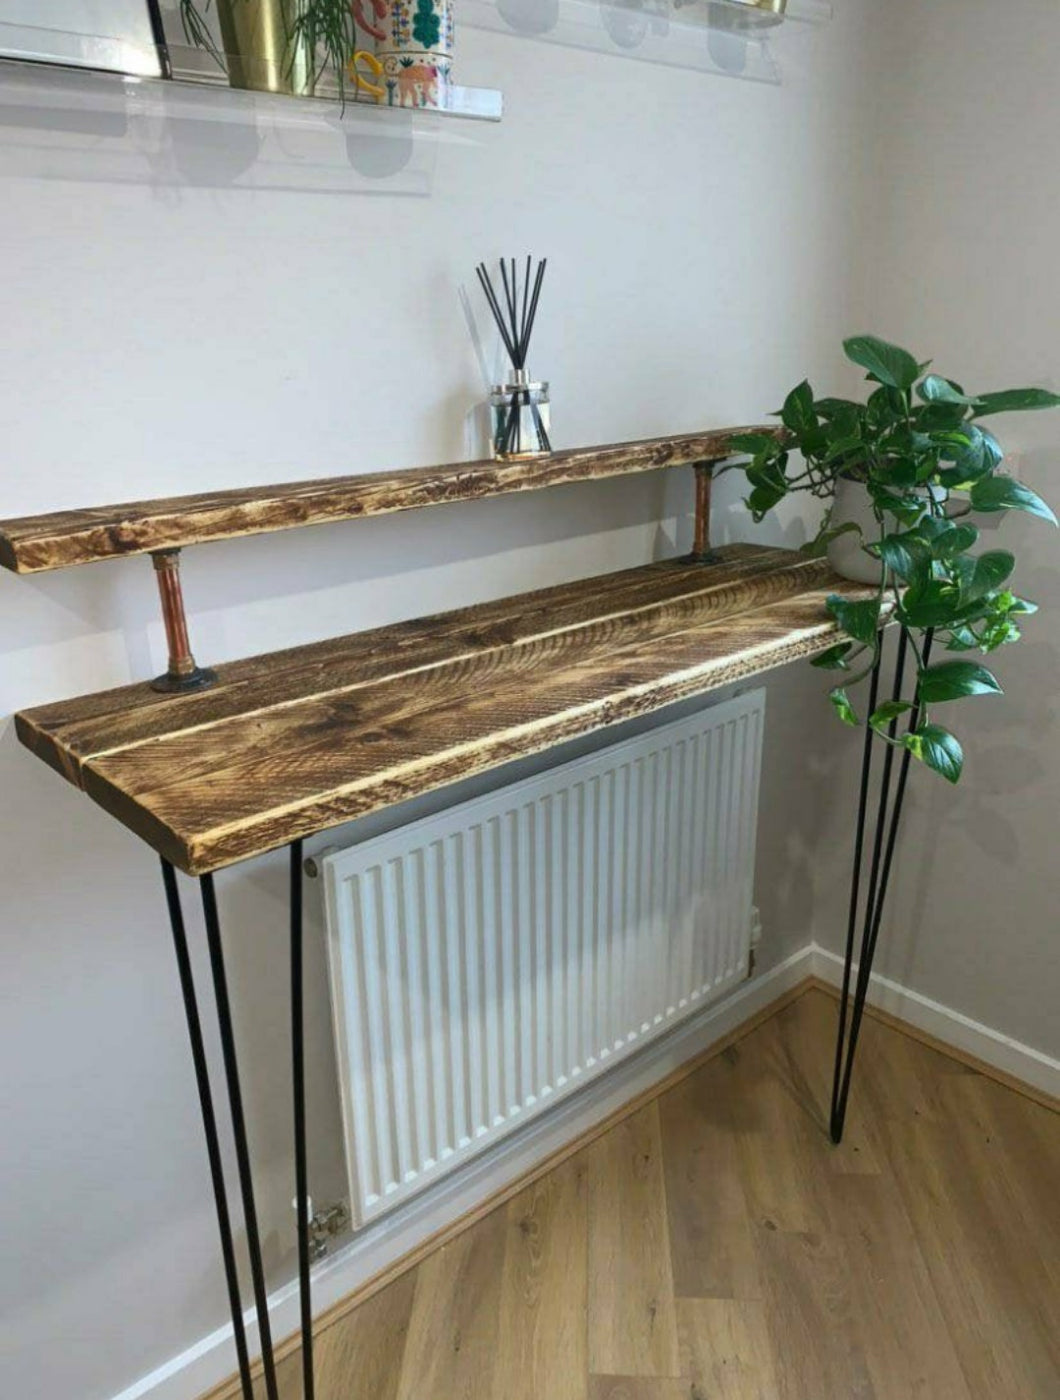 Rustic Two-Tier Breakfast Bar Supported by Steel Hairpin Legs